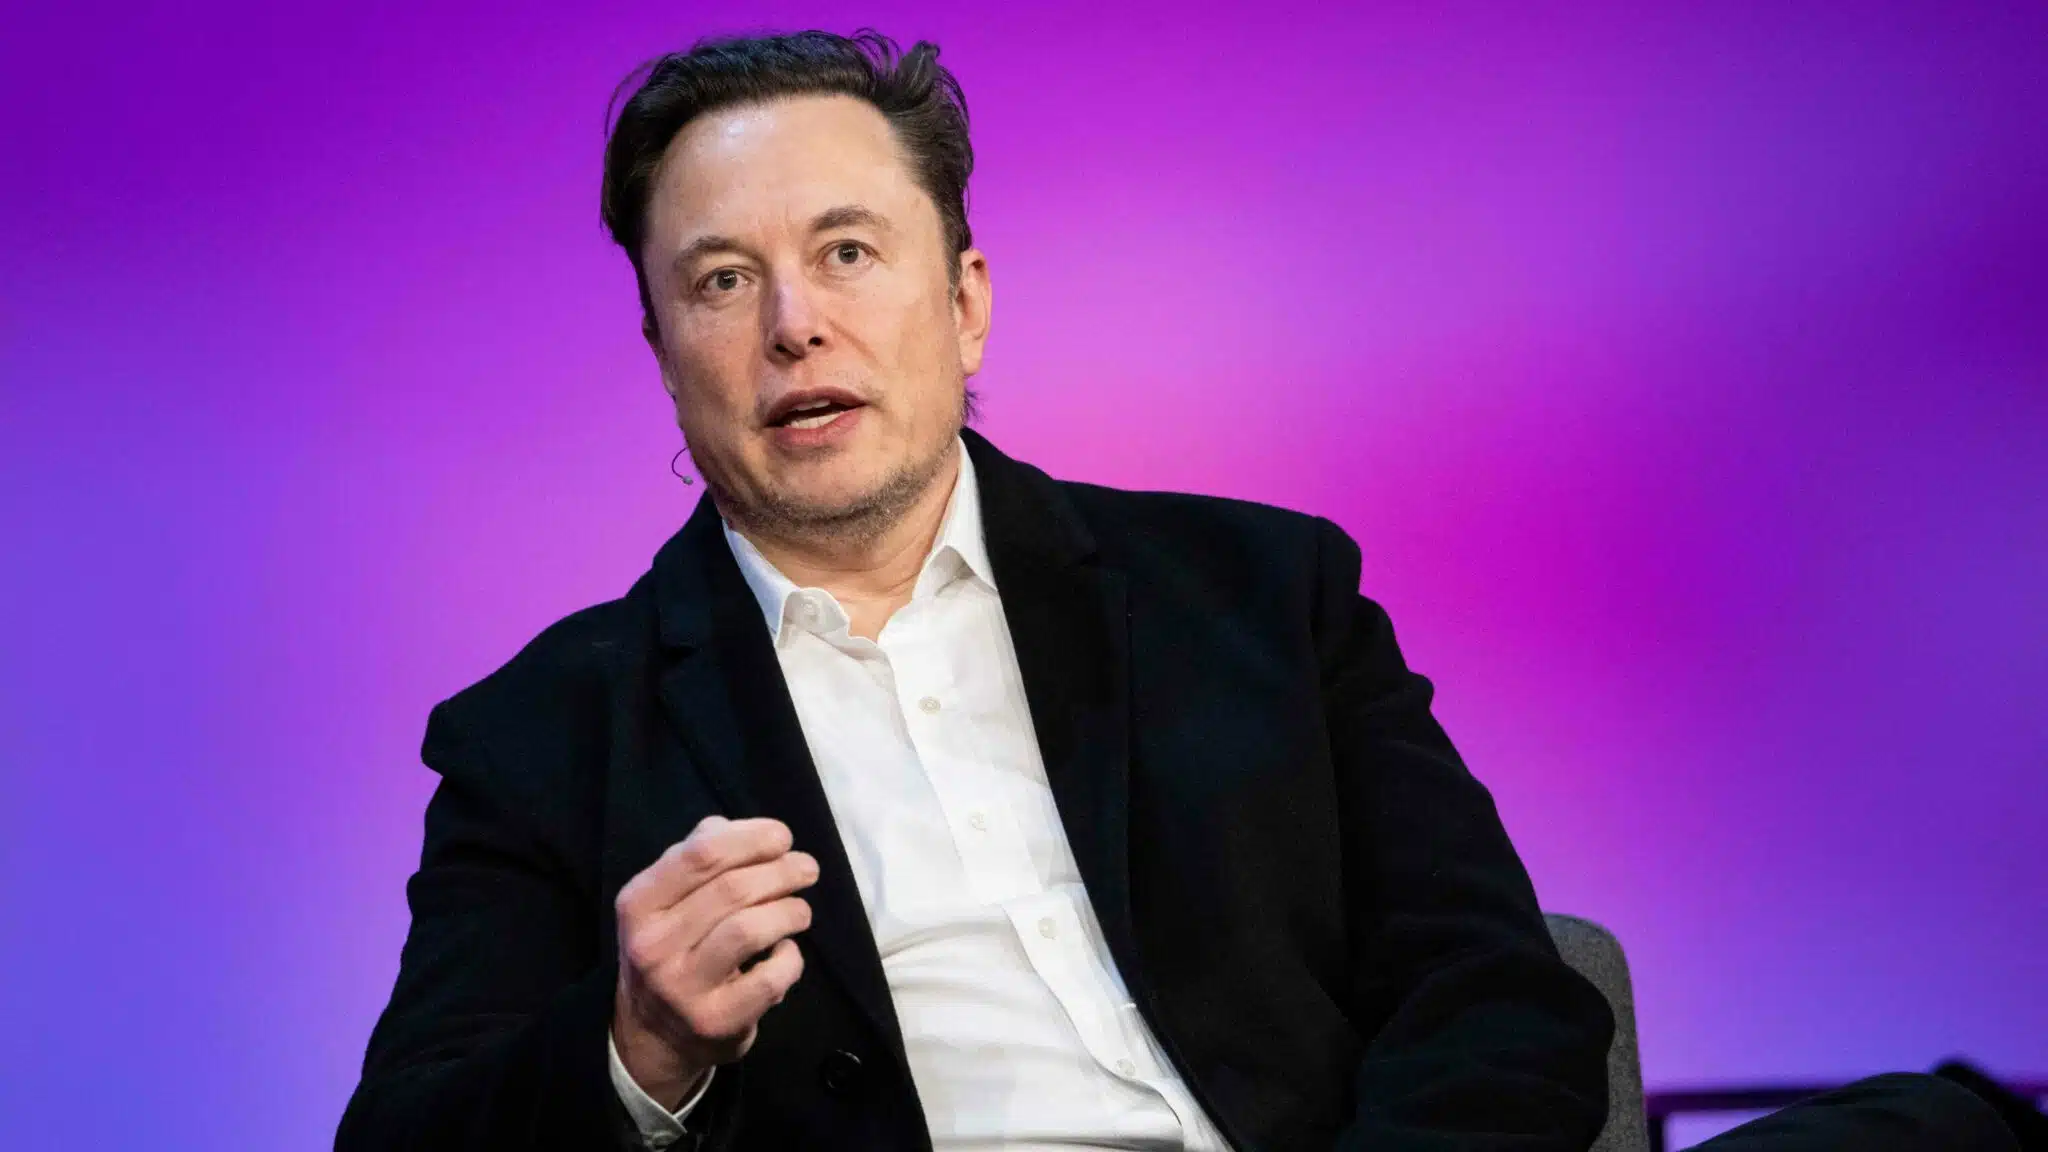 4 Reasons Why Elon Musk Buying Twitter Could Be a Good Thing